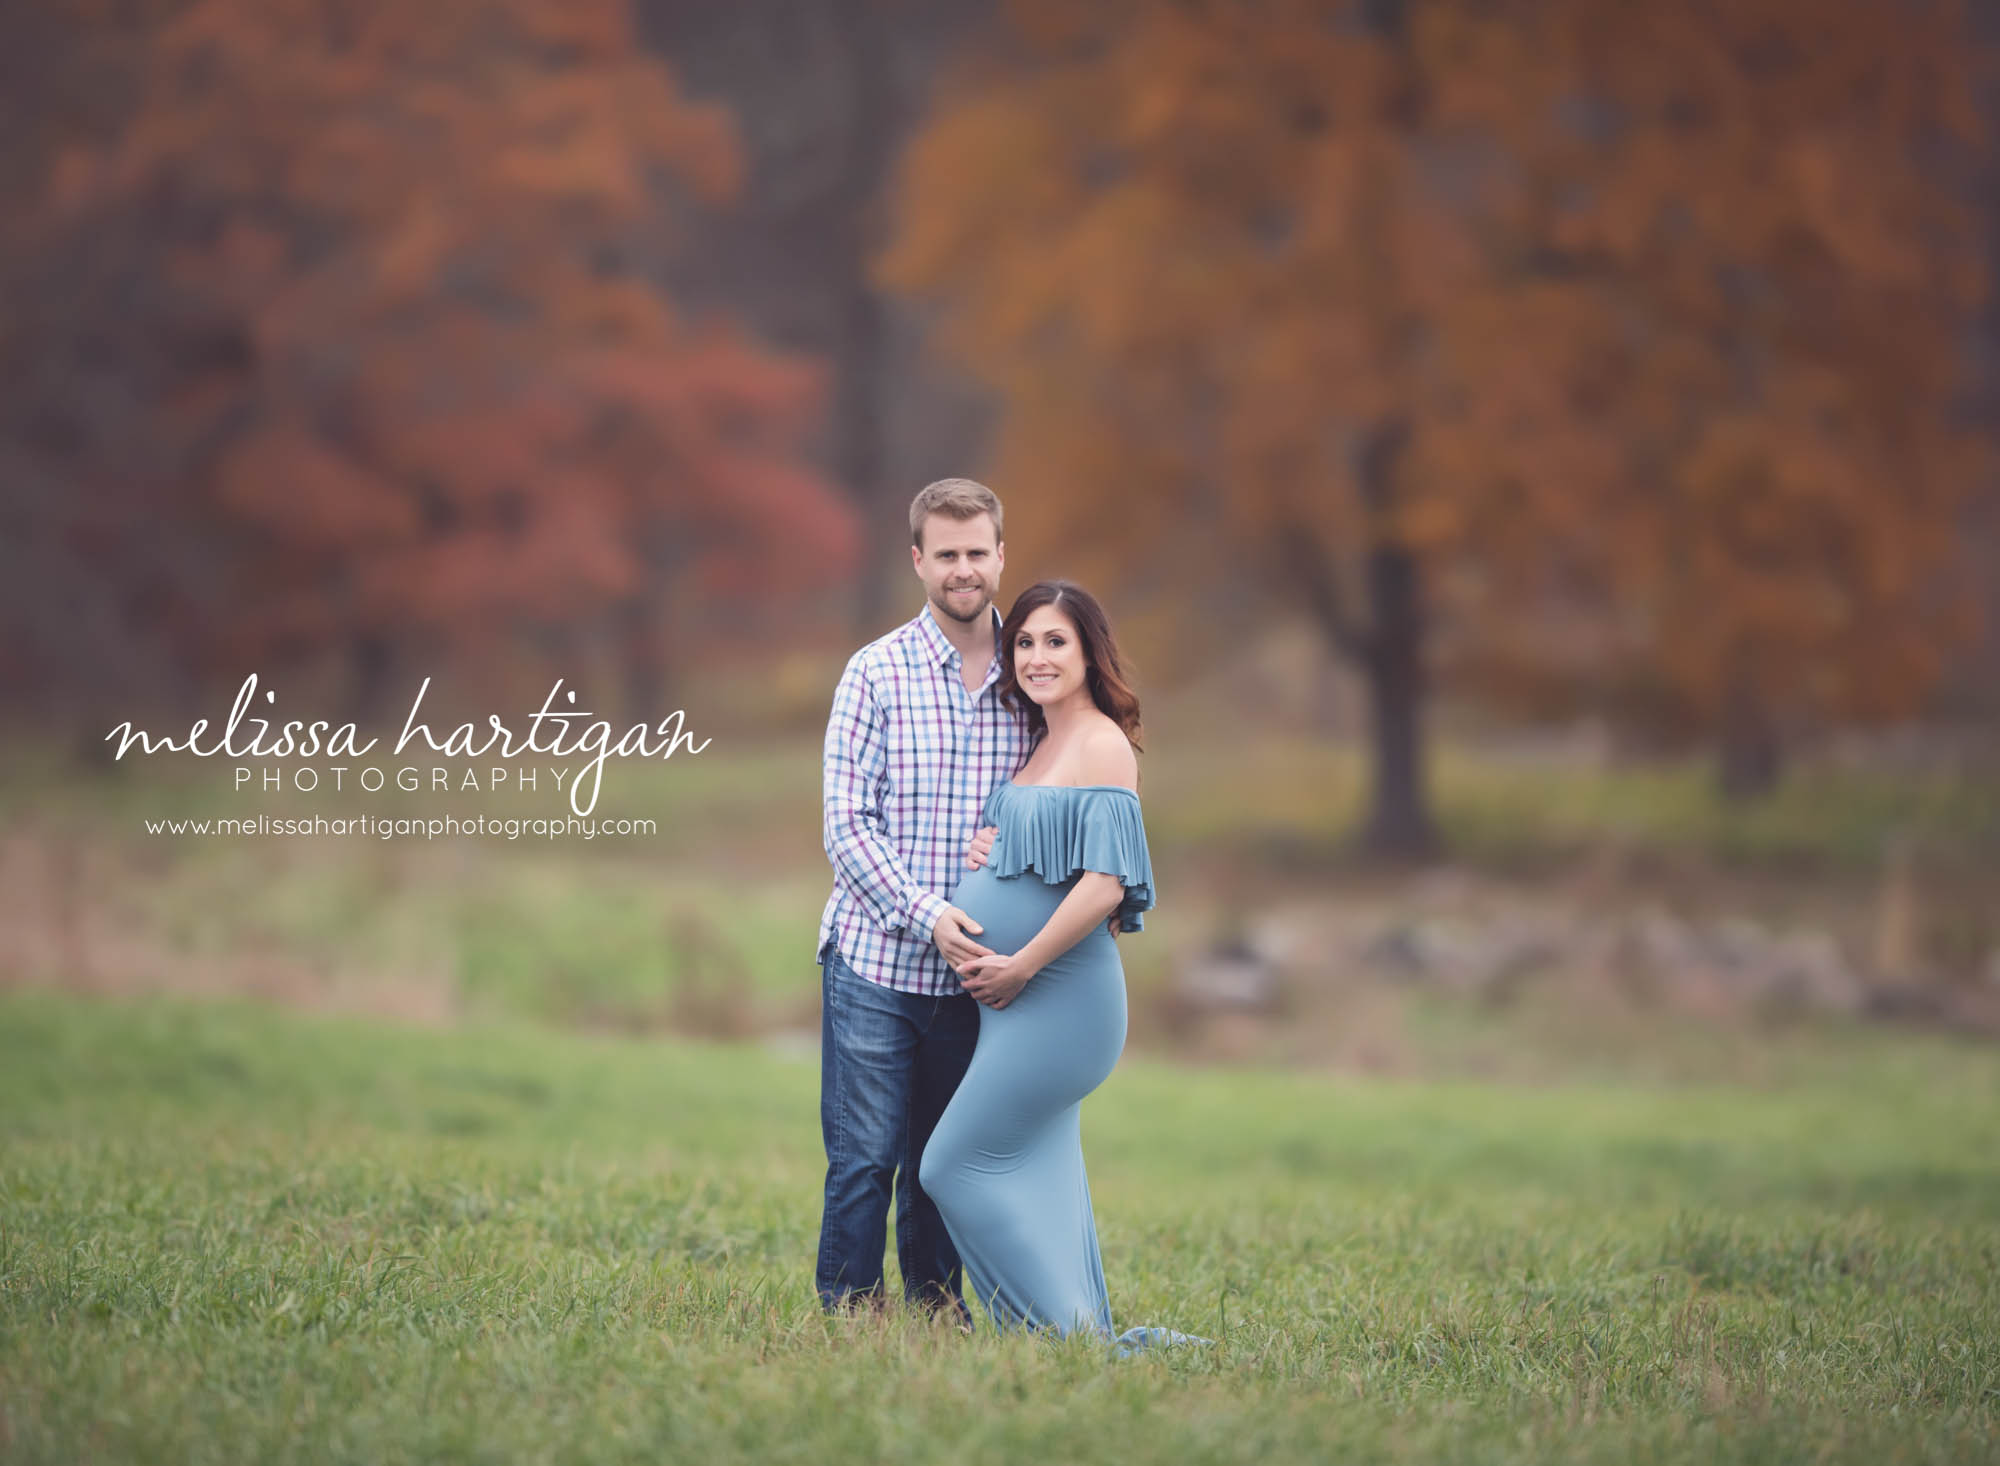 Melissa Hartigan Photography Coventry CT Newborn & Maternity Photographer Coventry CT Maternity Newborn Session Carrie wearing blue maternity gown standing in field holding baby bump with husband